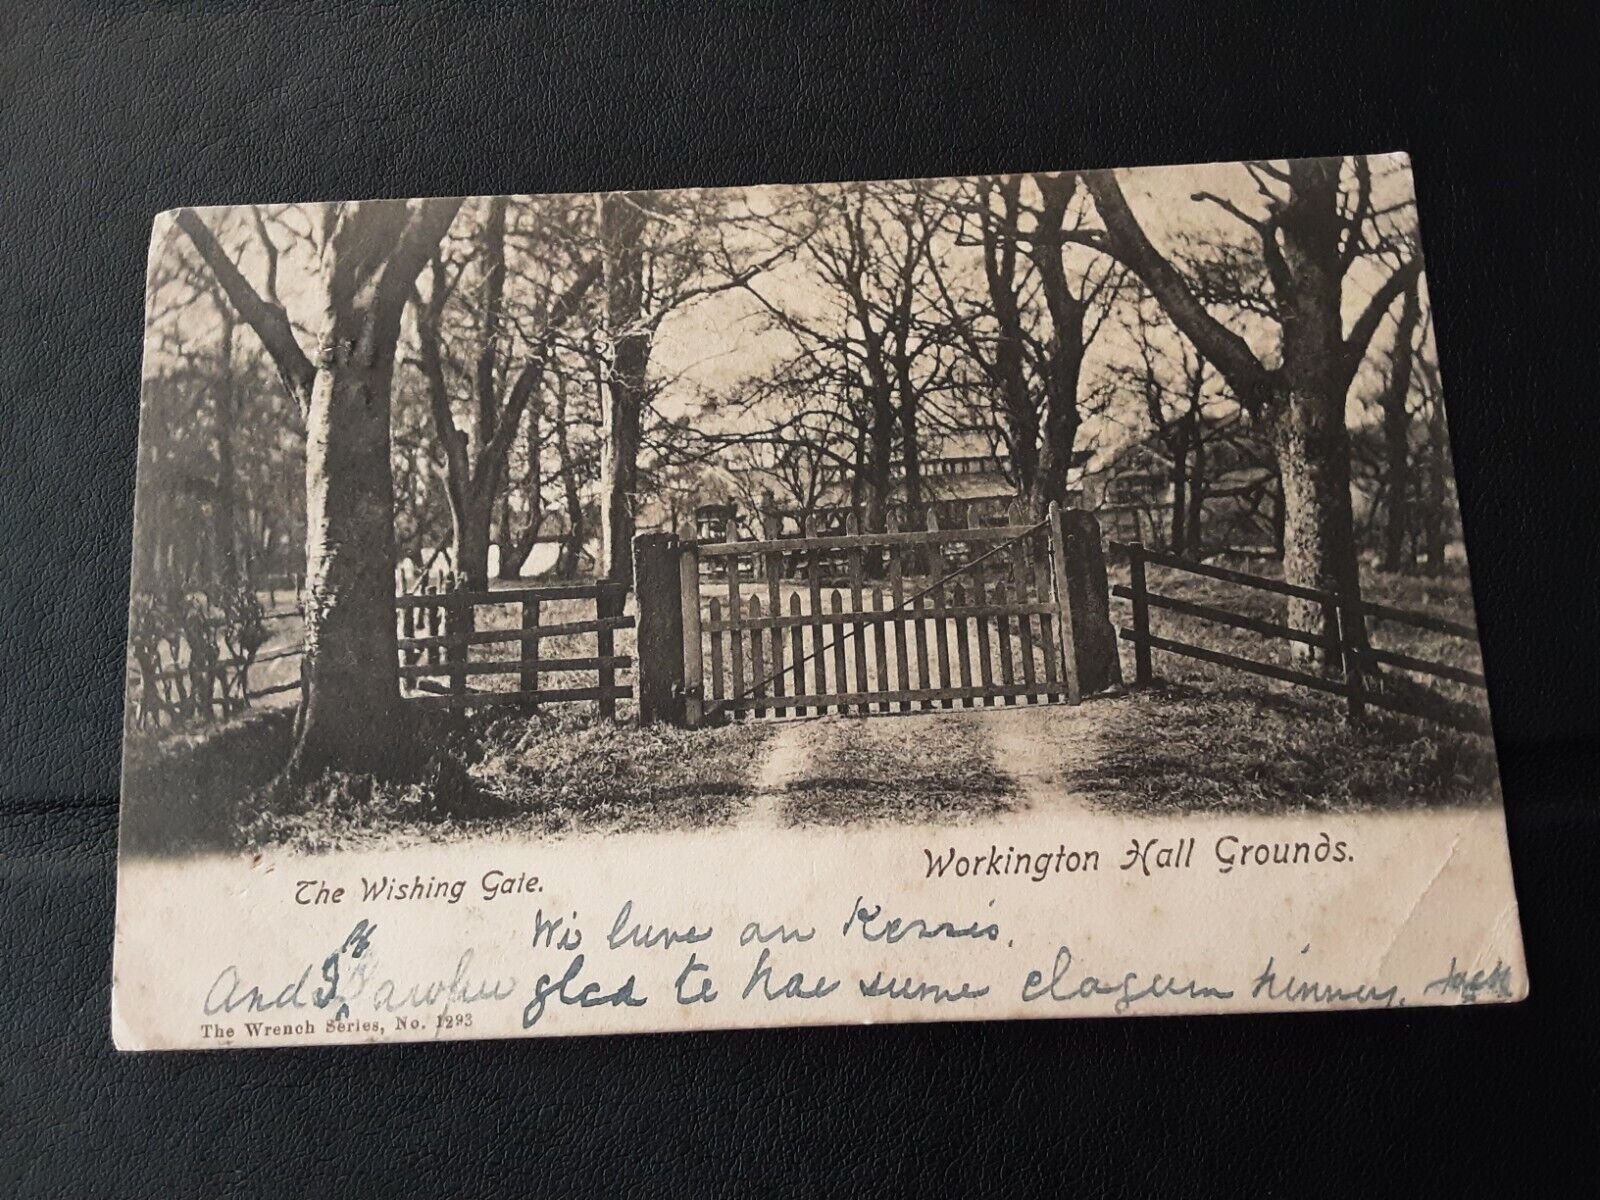 House Clearance - Old Wrench service of Wishing Gate, Workington Hall Grounds, Cumbria 1903 AF